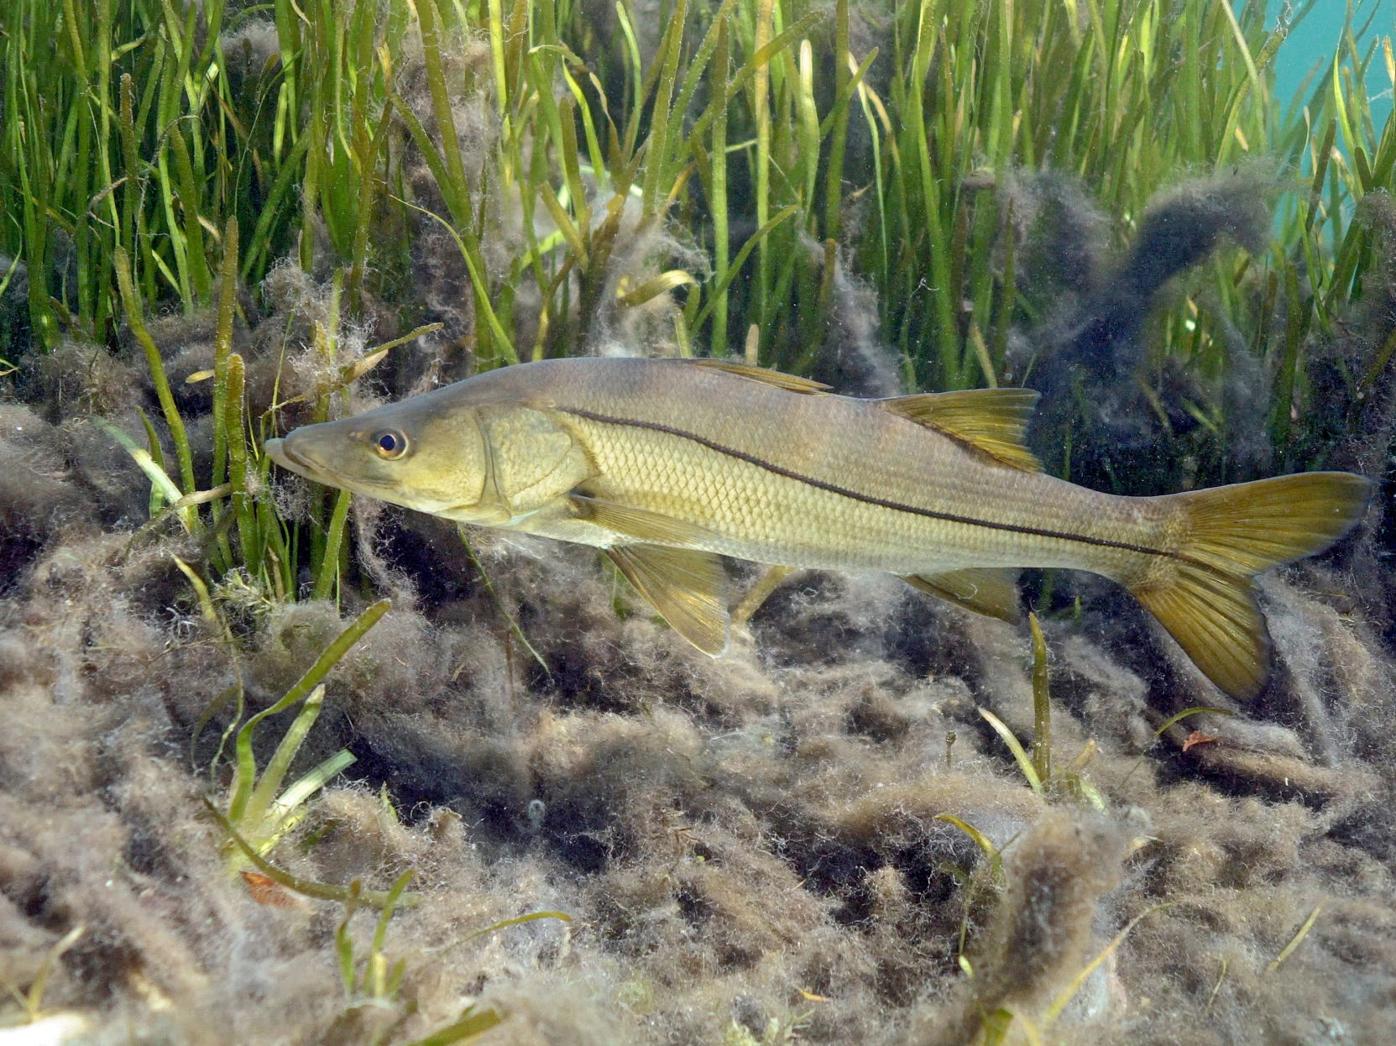 How a snook is like a bass, Waterline